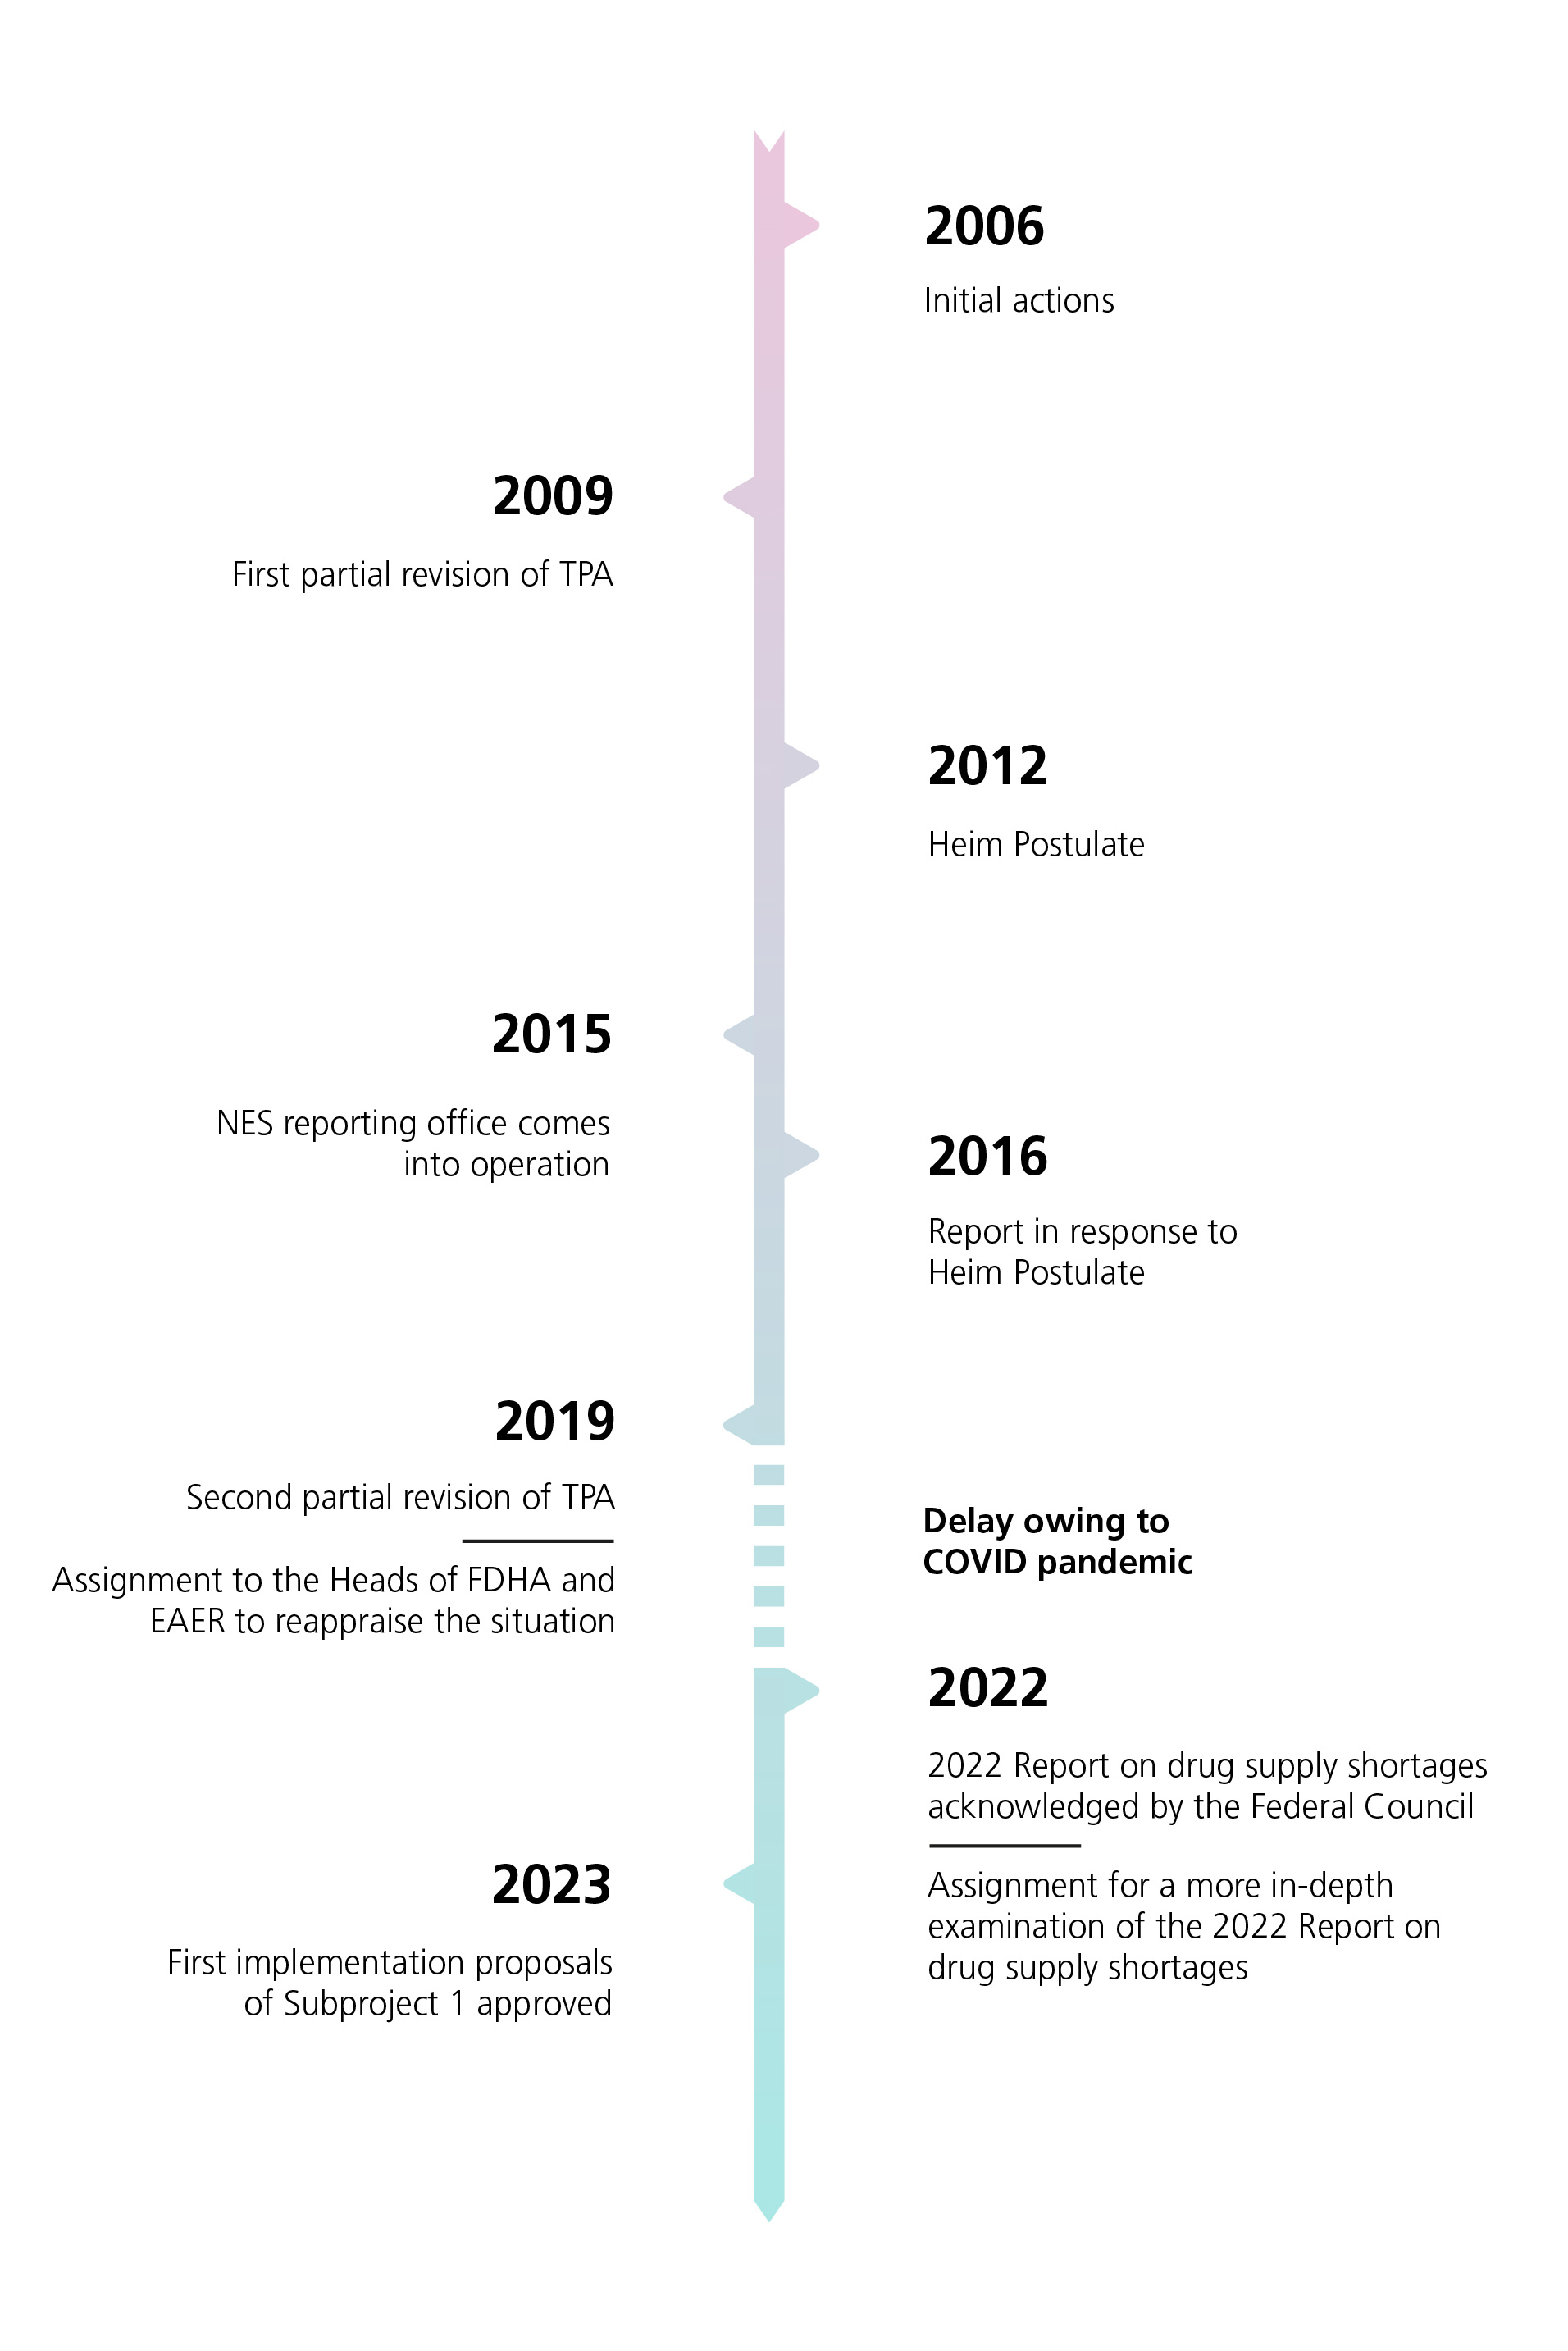 The vertical diagram presents a timeline from 2006 to today, along which are marked the key milestones reached by the Swiss Confederation in securing medicine supplies. The timeline highlights eight years in which such major progress was achieved. The milestones concerned are presented chronologically and in greater detail in the accompanying text.